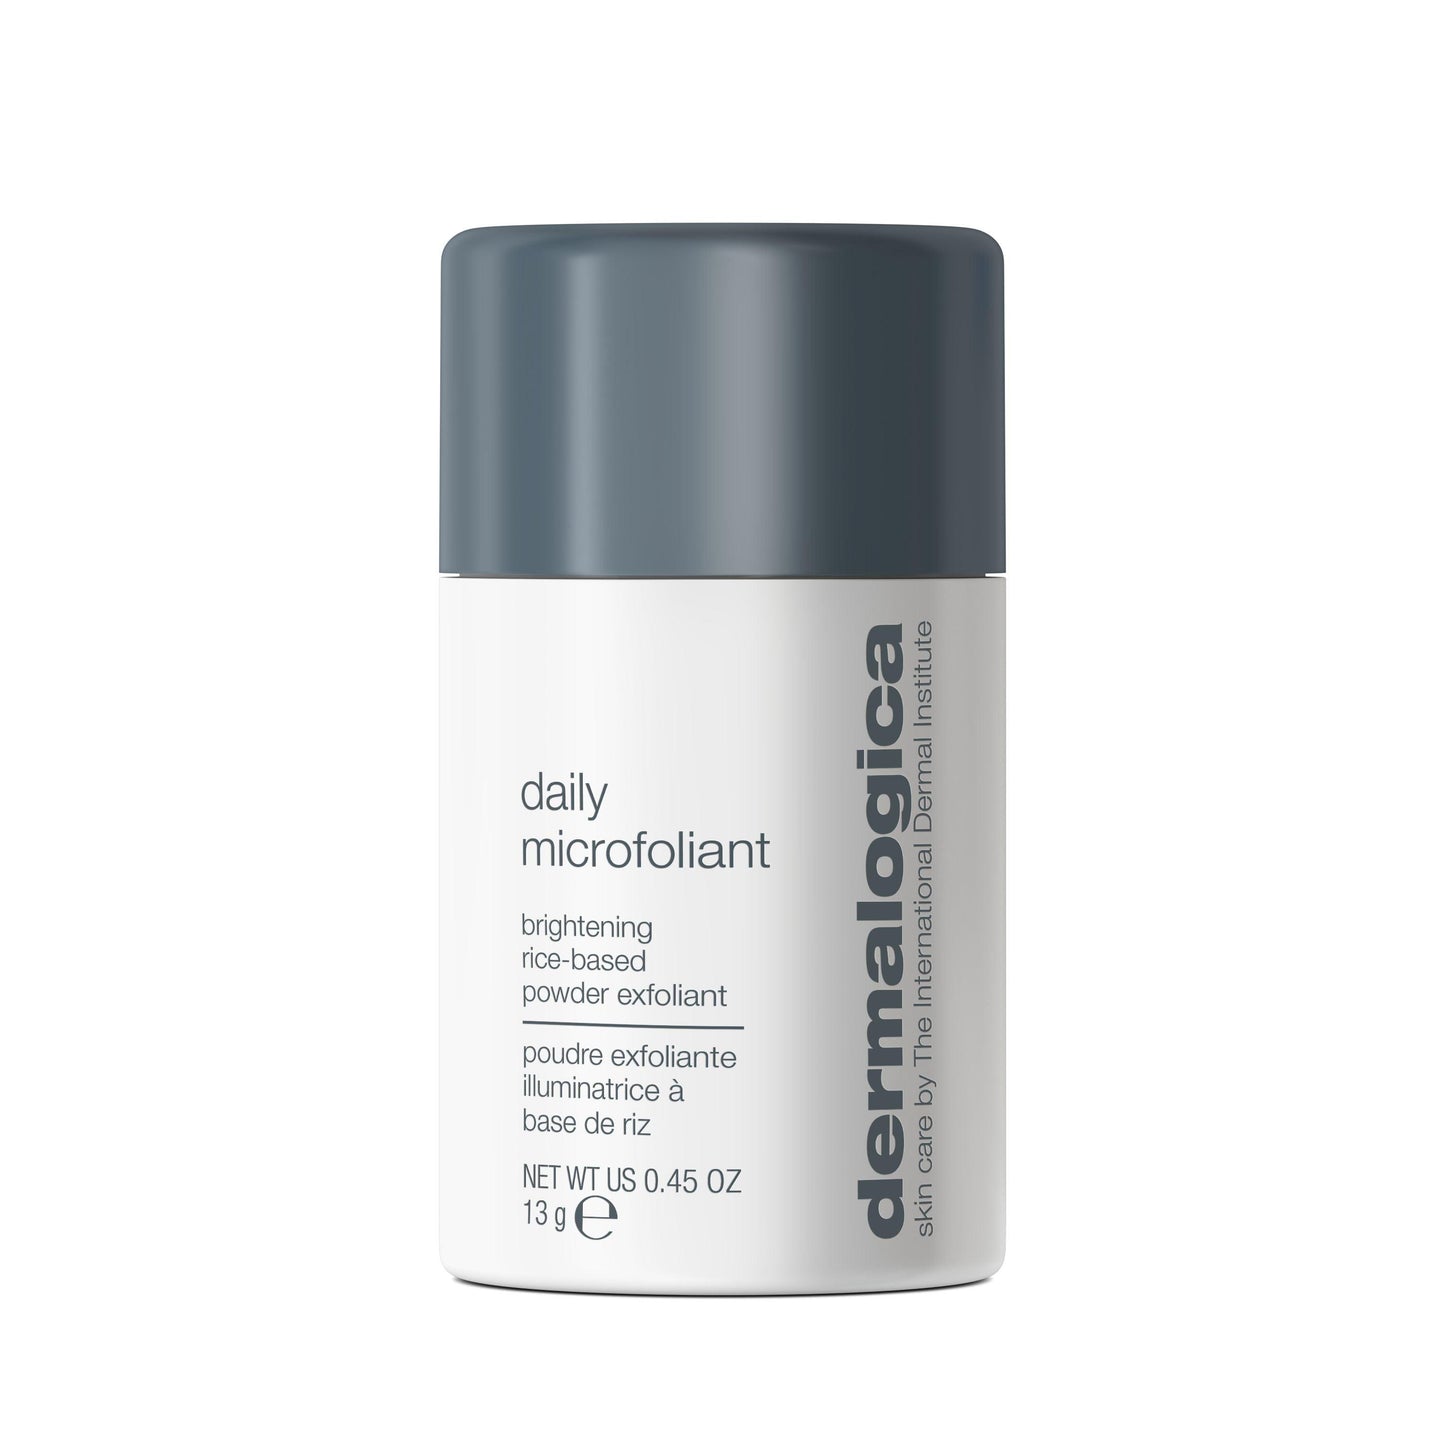 daily microfoliant 13g (gift, not for sale) - Dermalogica Hong Kong